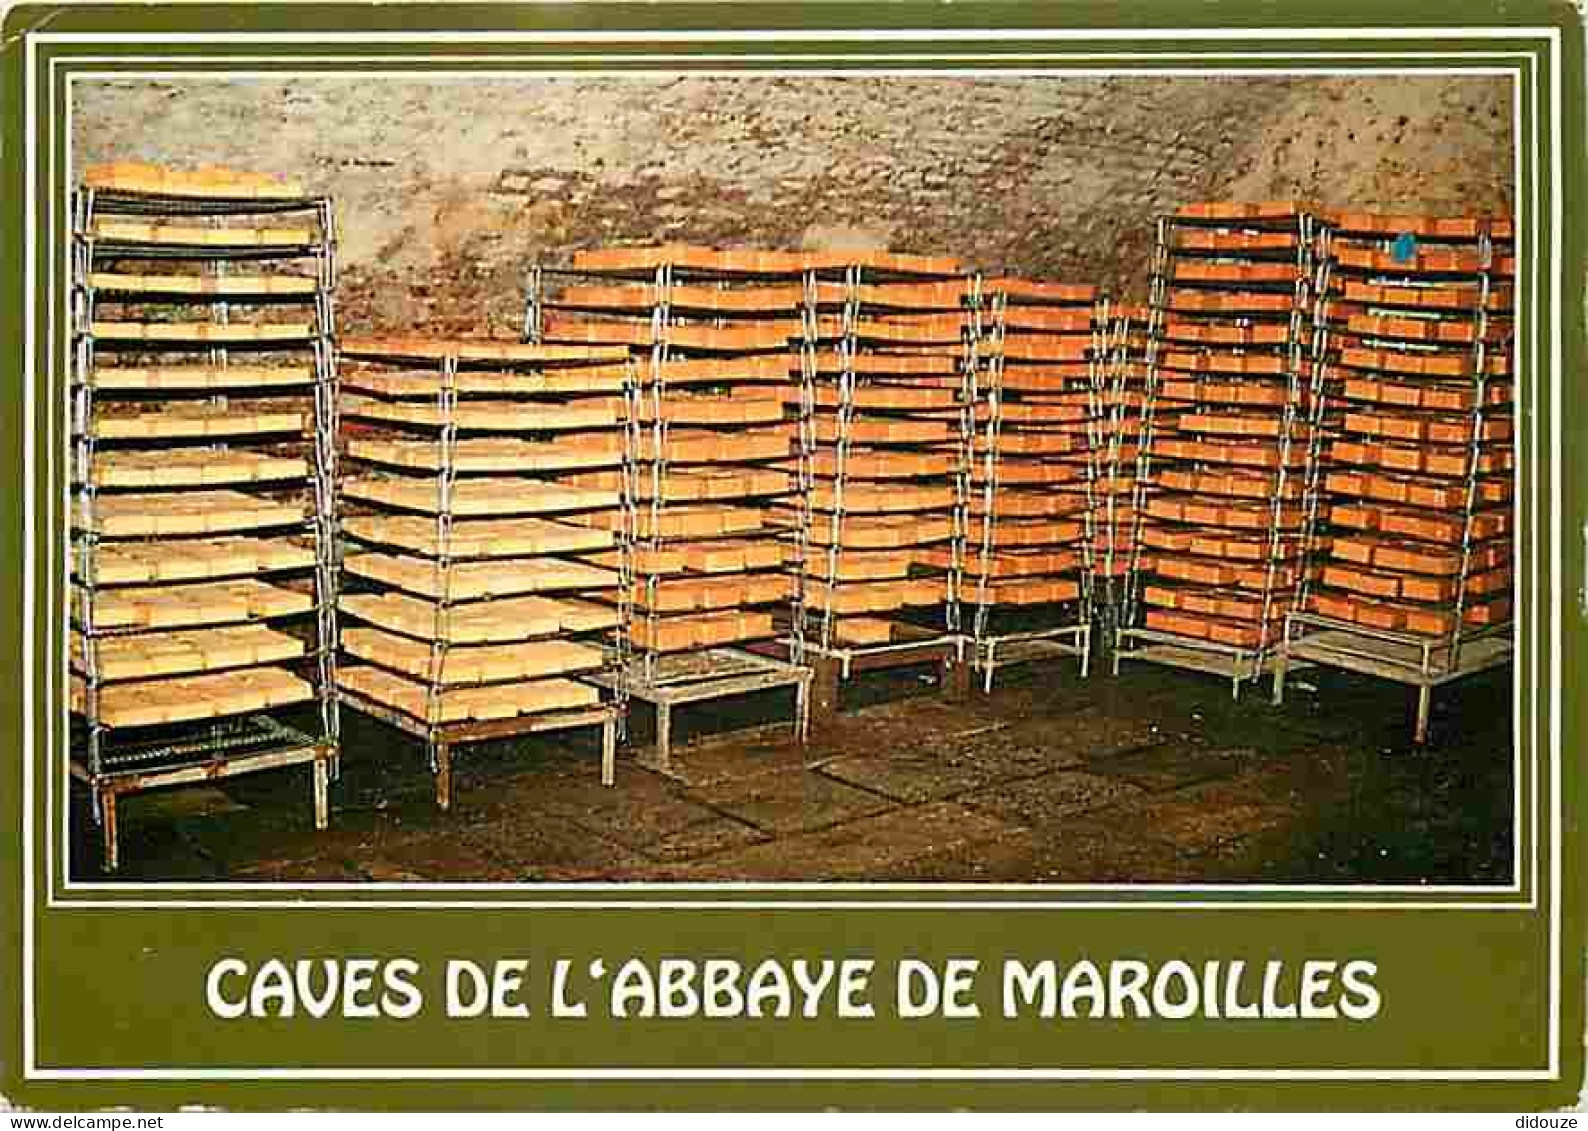 Metiers - Fromager - Fromages - Fromagerie - Maroilles - Les Caves De L'Abbaye - Affinage Des Fromages  - CPM - Voir Sca - Craft